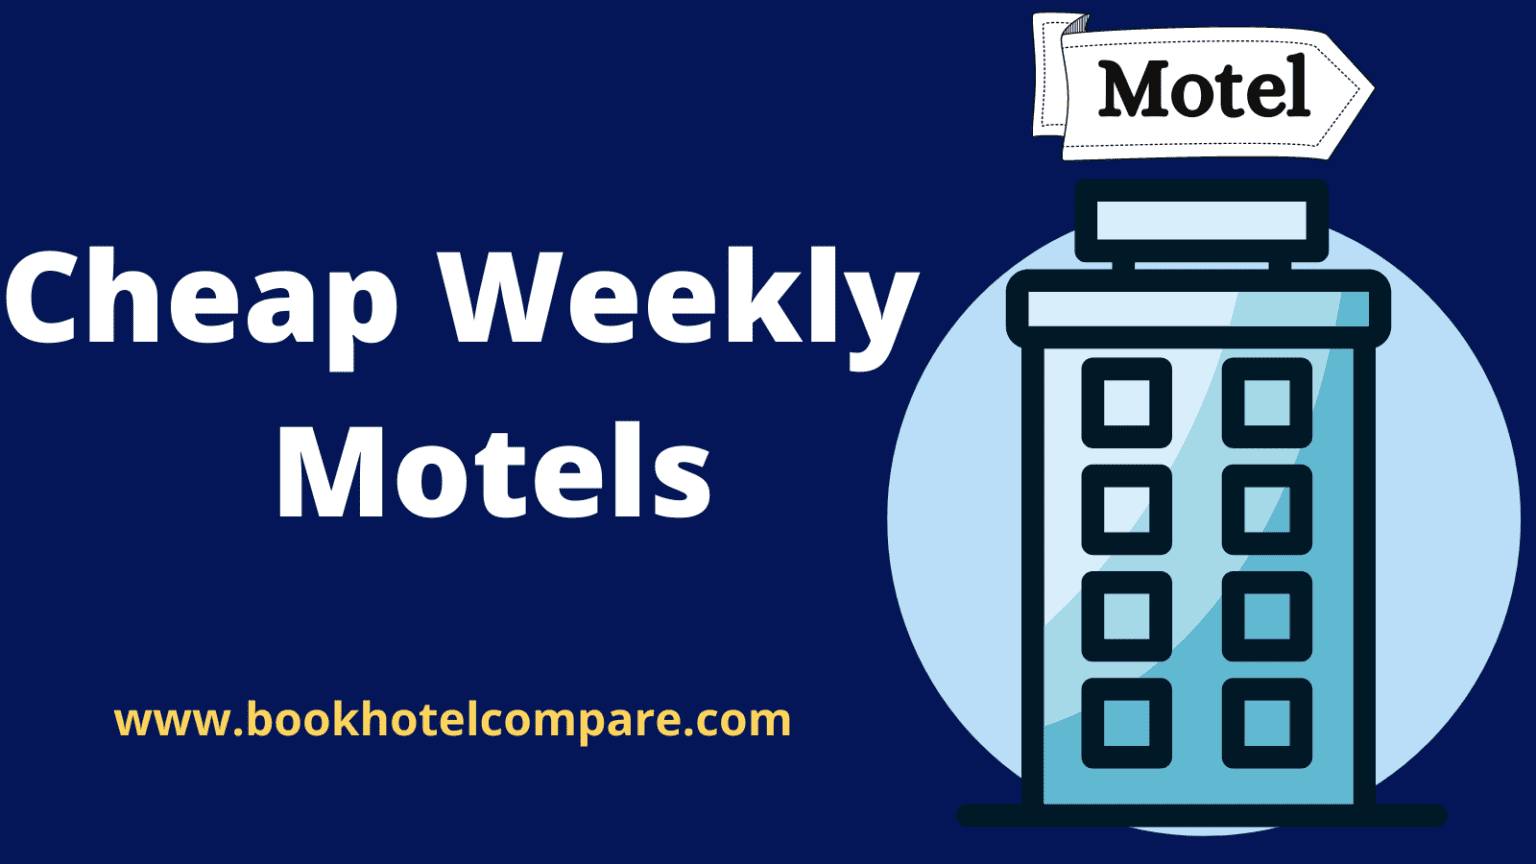 How To Find Cheap Motels Near Me Under $50 For Tonight